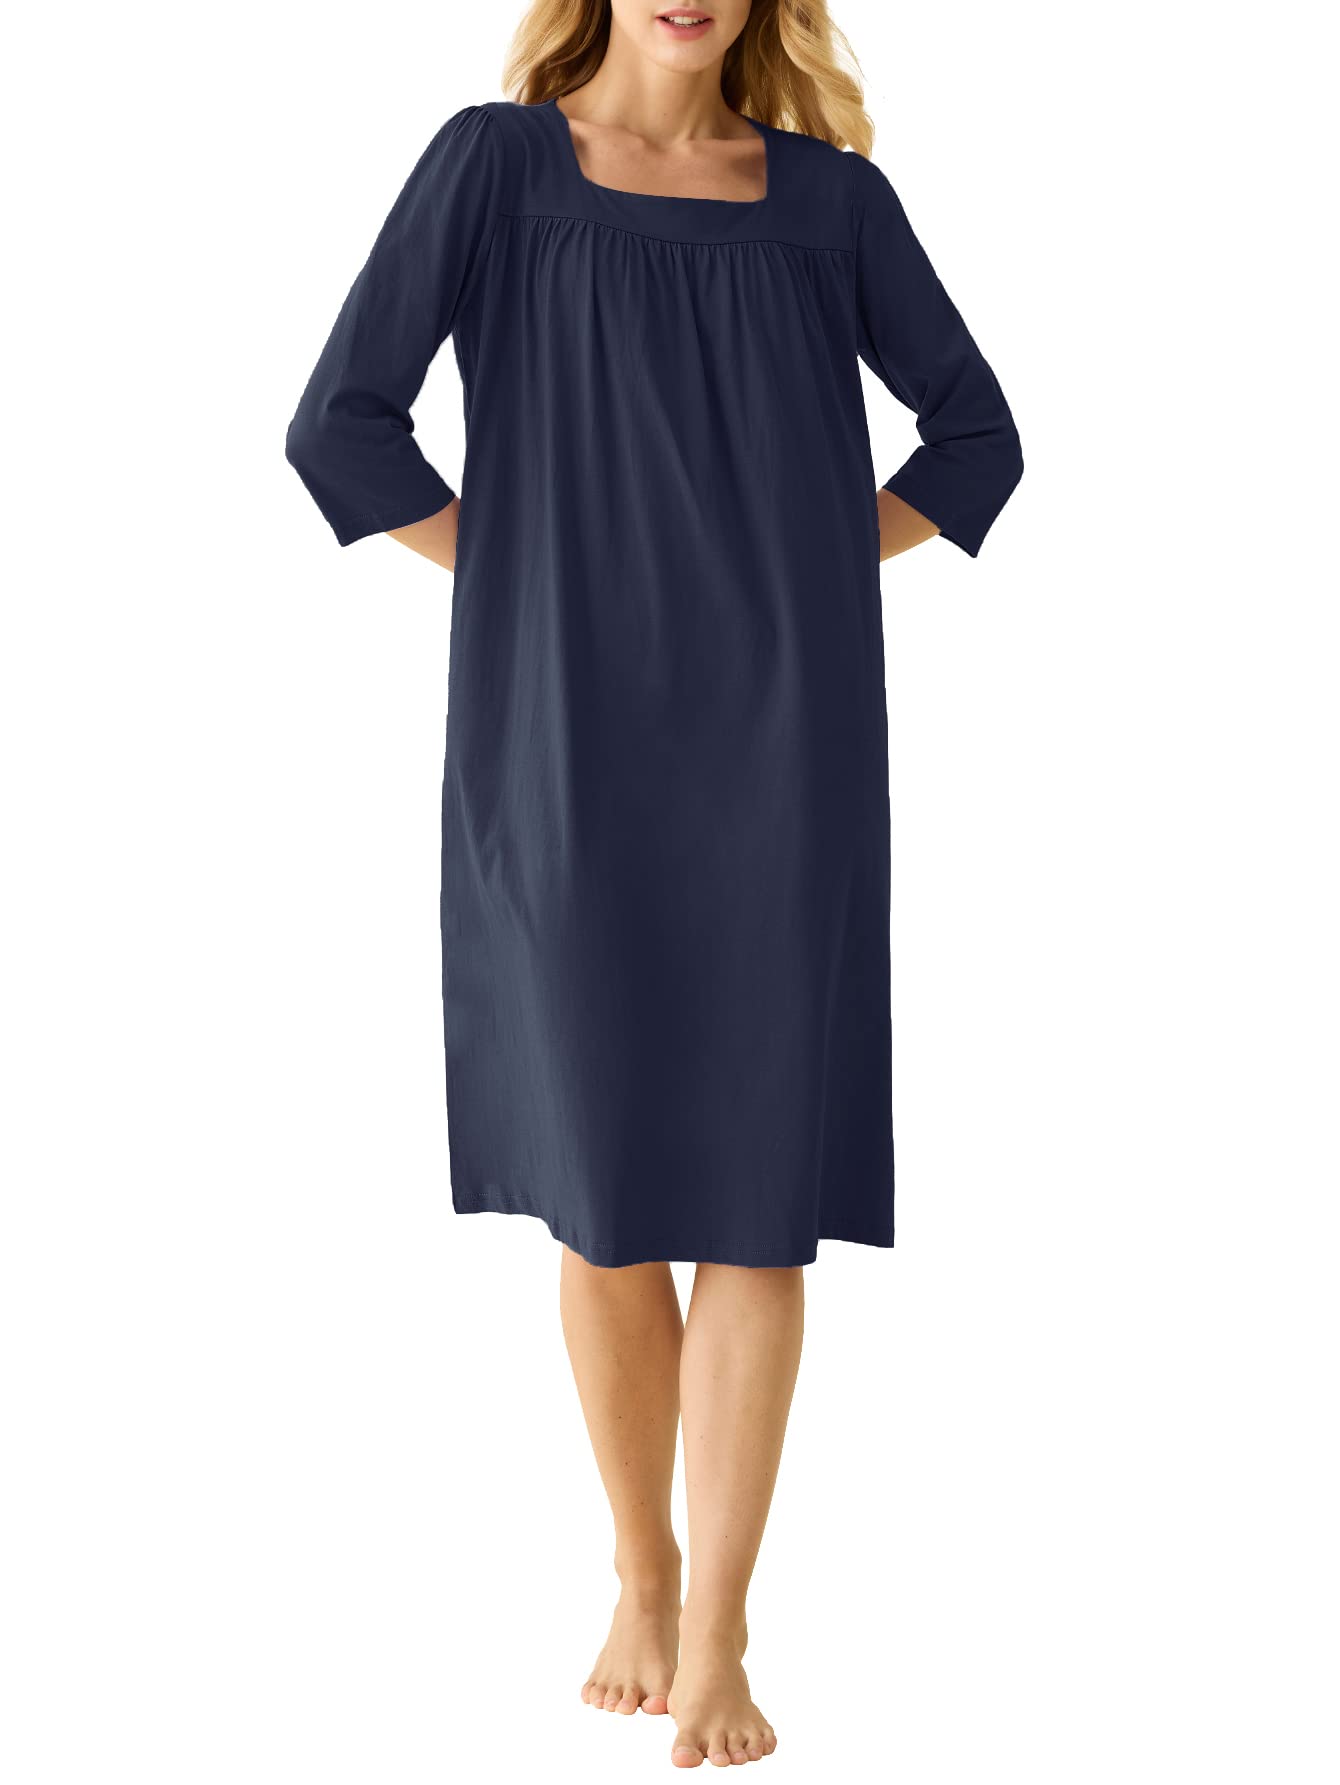 Women's Cotton Nightgown 3/4 Sleeves Housecoat with Pockets  - Latuza